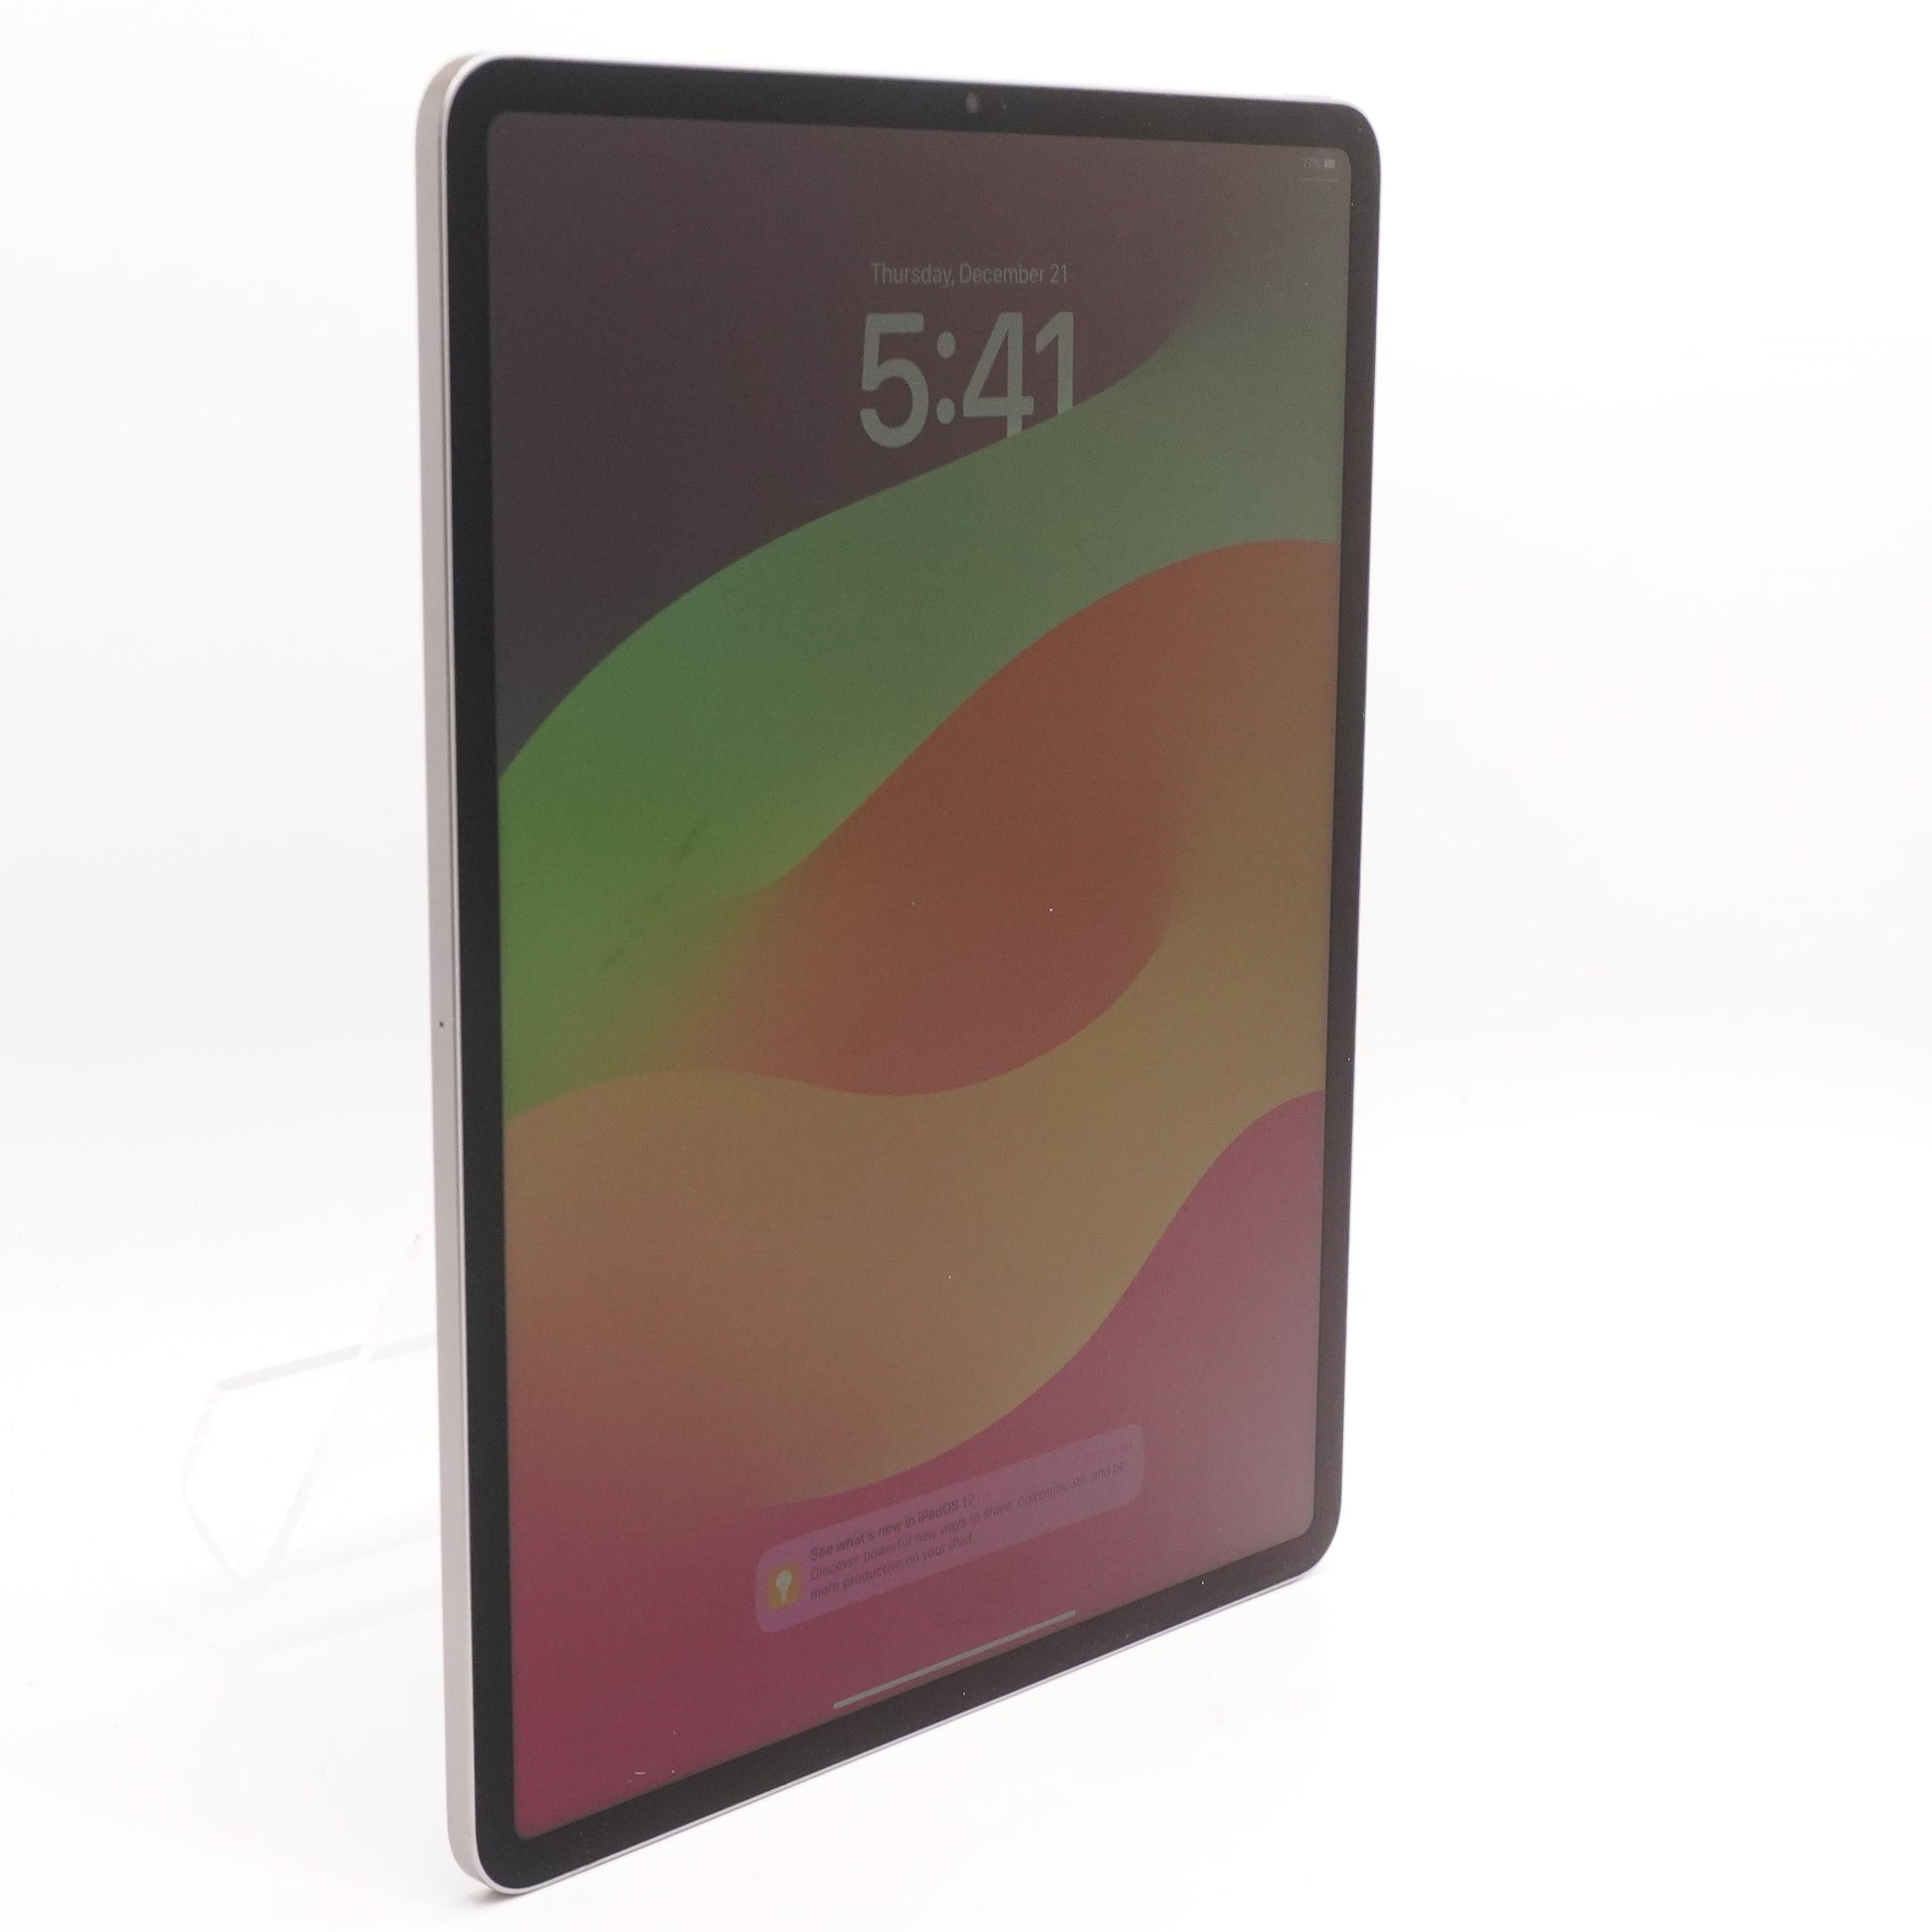 Will the 6th gen iPad get iPadOS 17? How long do you think Apple